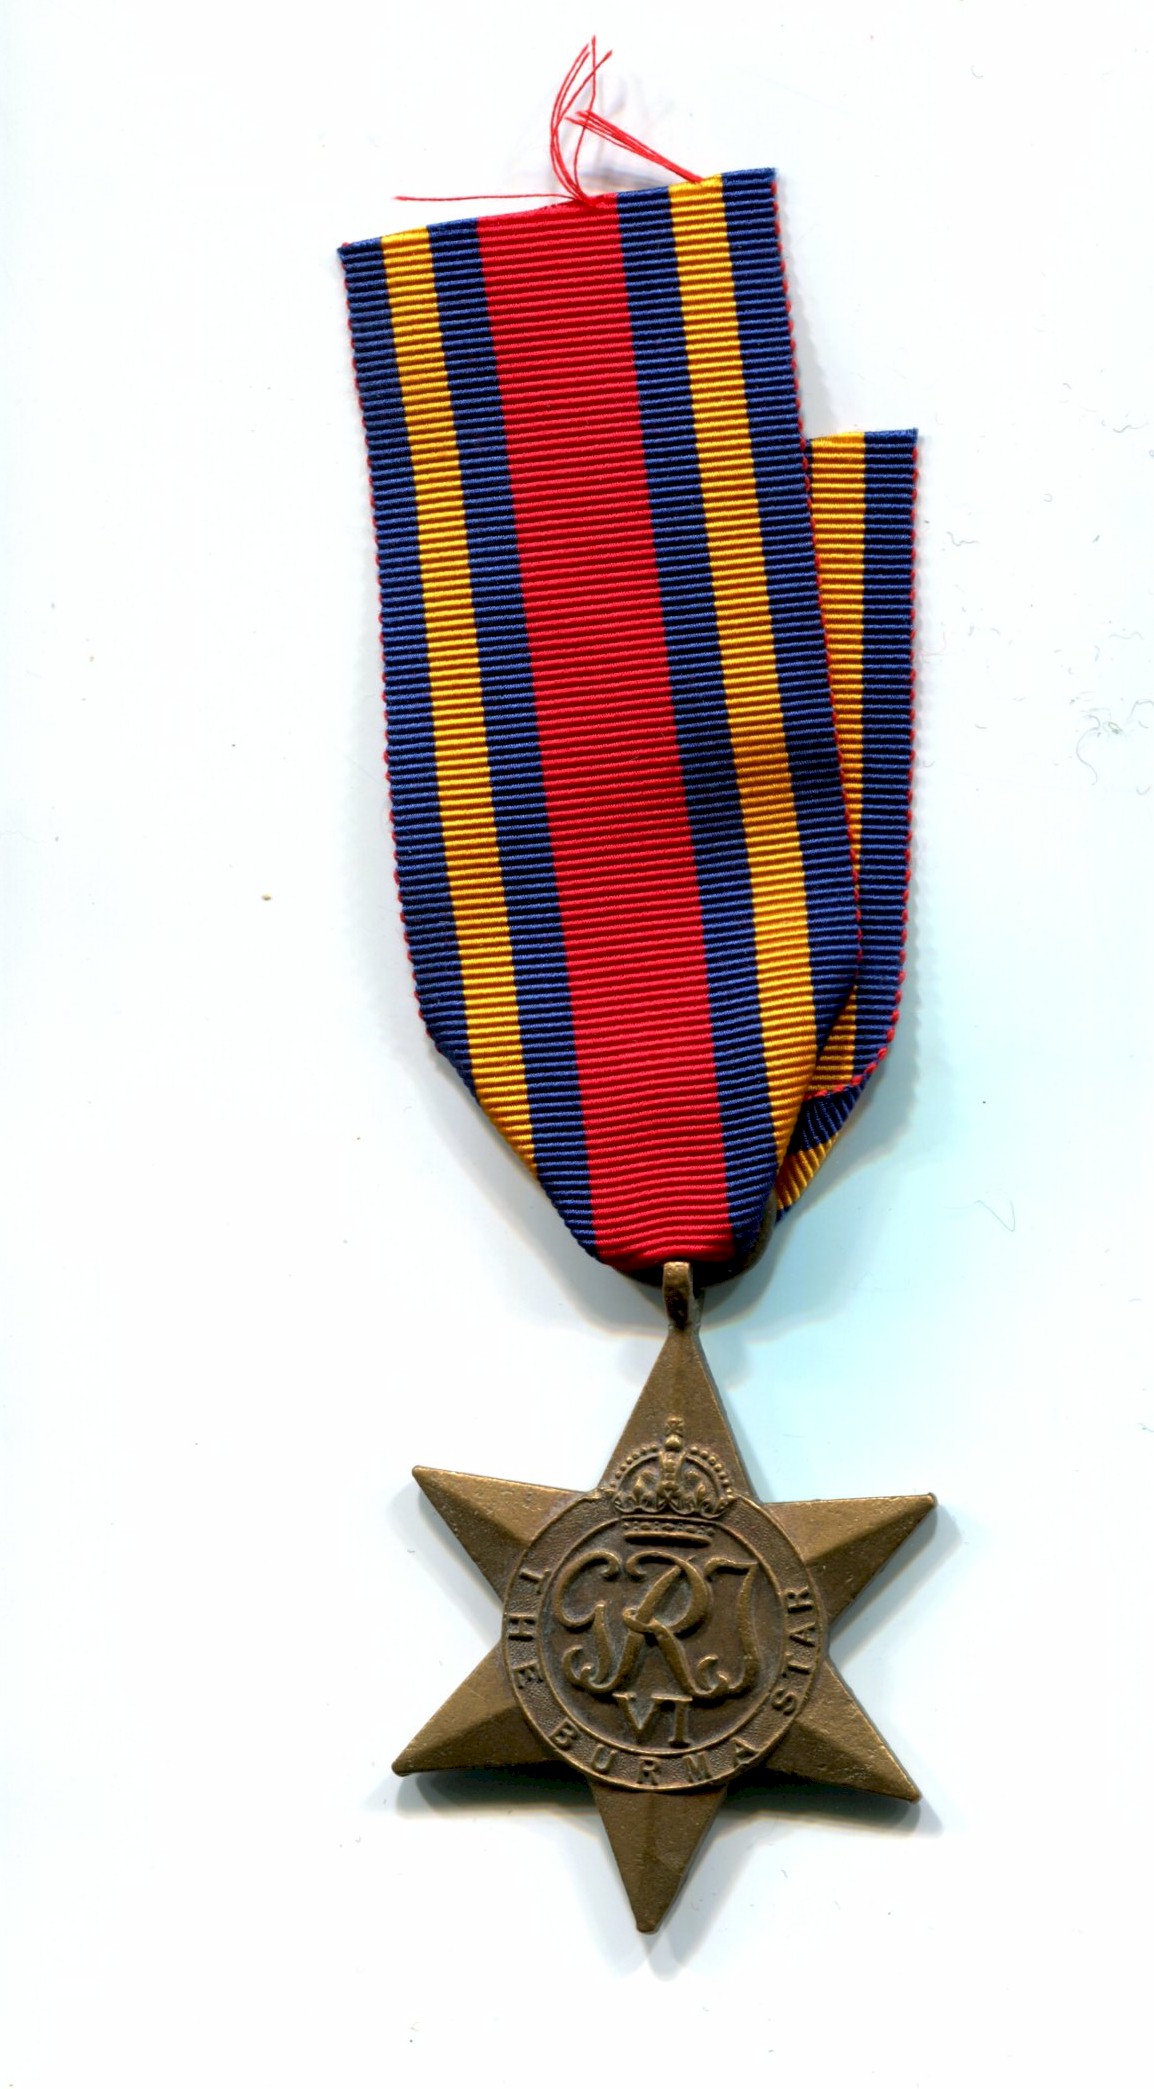 CANADIAN  BRITISH WW2 BURMA STAR MEDAL FOR ACTIVE SERVICE AGAINST THE JAPANESE IN ASIA